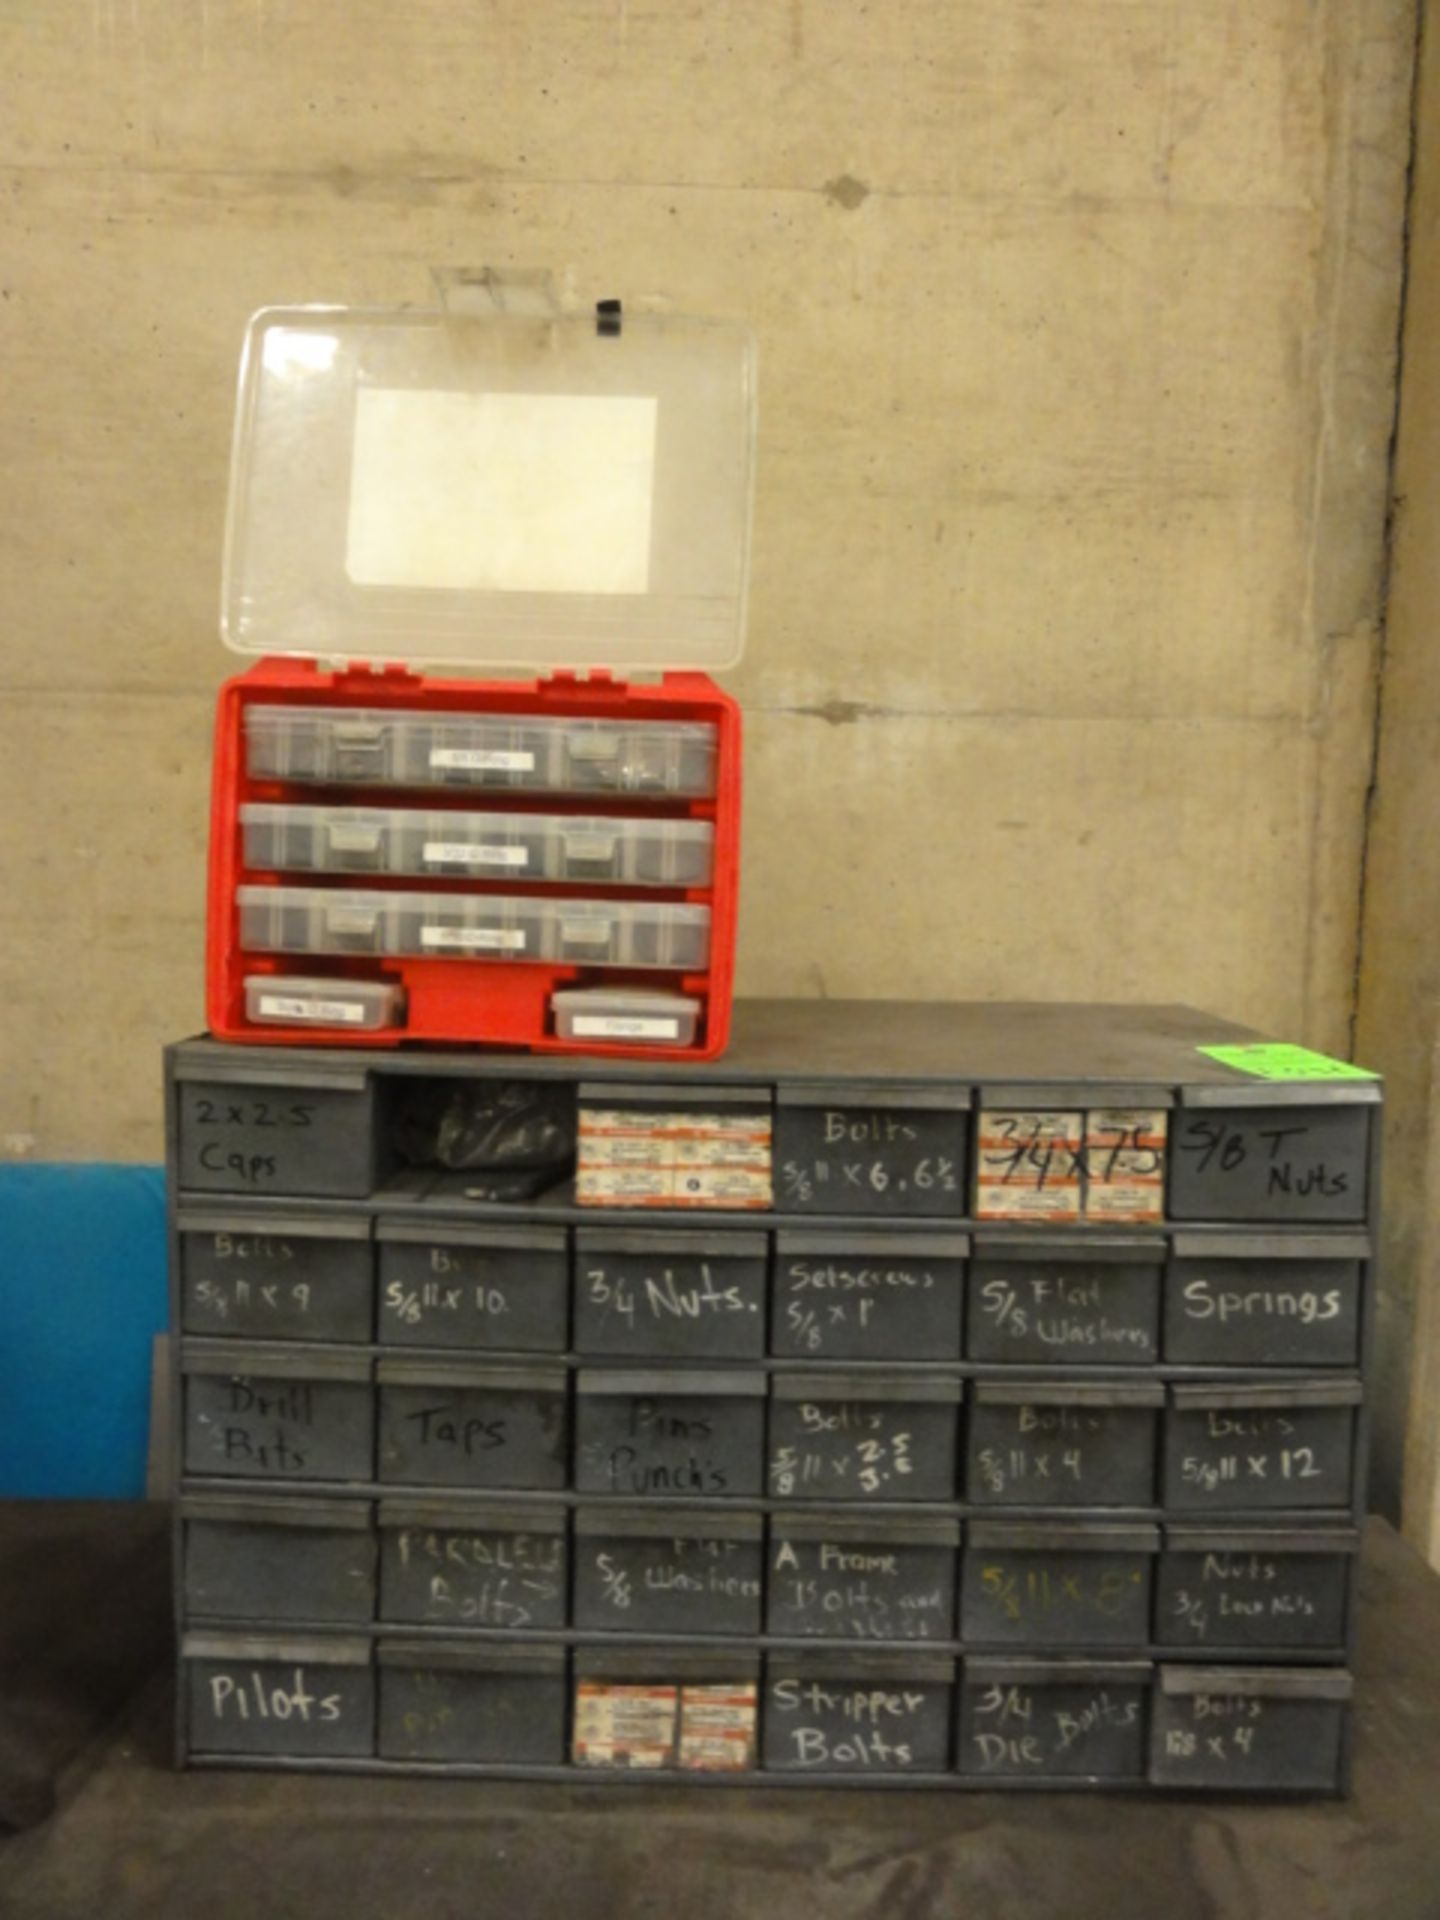 29-Drawer Small Parts Bins w/ Contents Incl Drills, Taps, Pin Punches, Bolts, Nuts, Multi Drawer